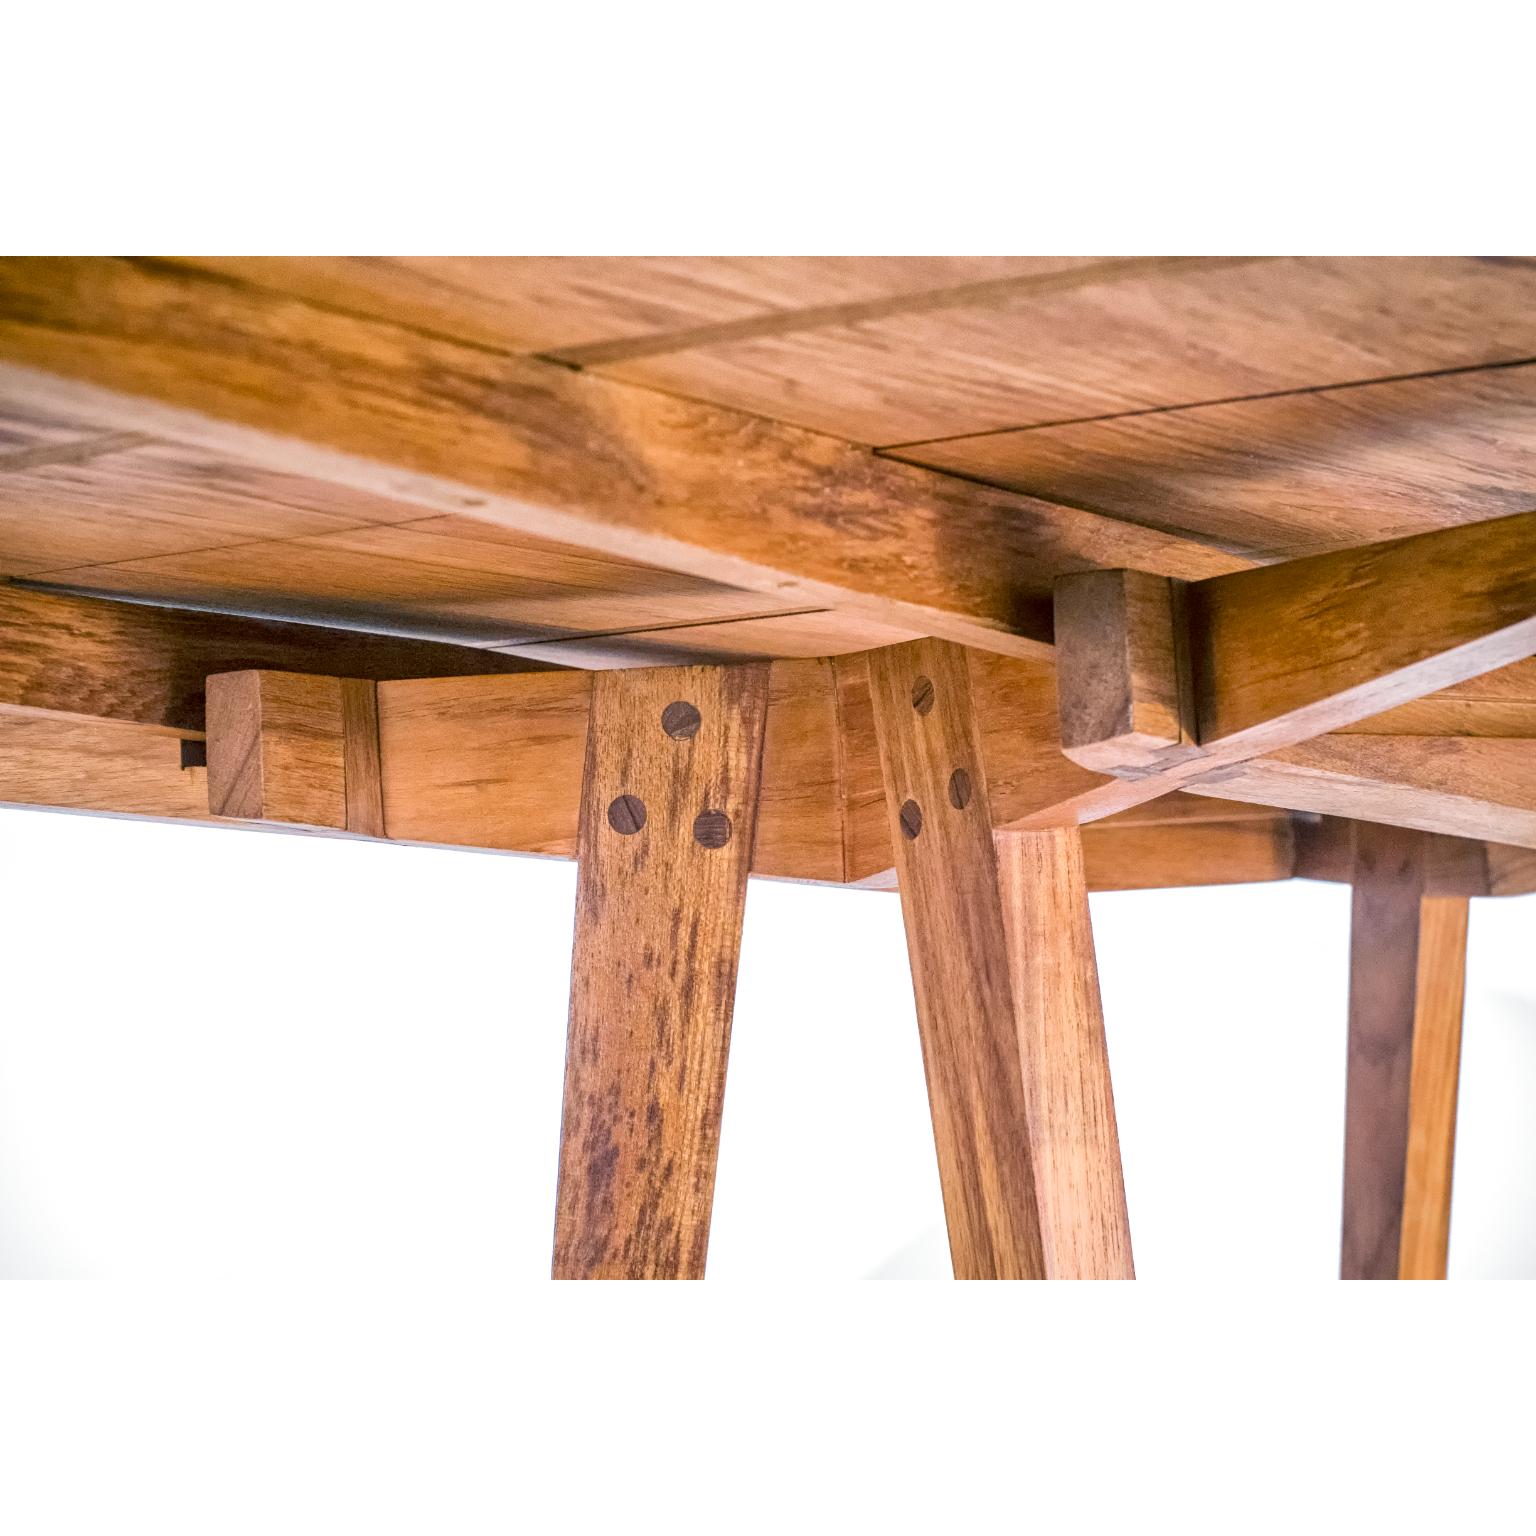 Oak Dutch Pull Out Table in Hardwood with Japanese Joinery and Danish Aesthetics For Sale